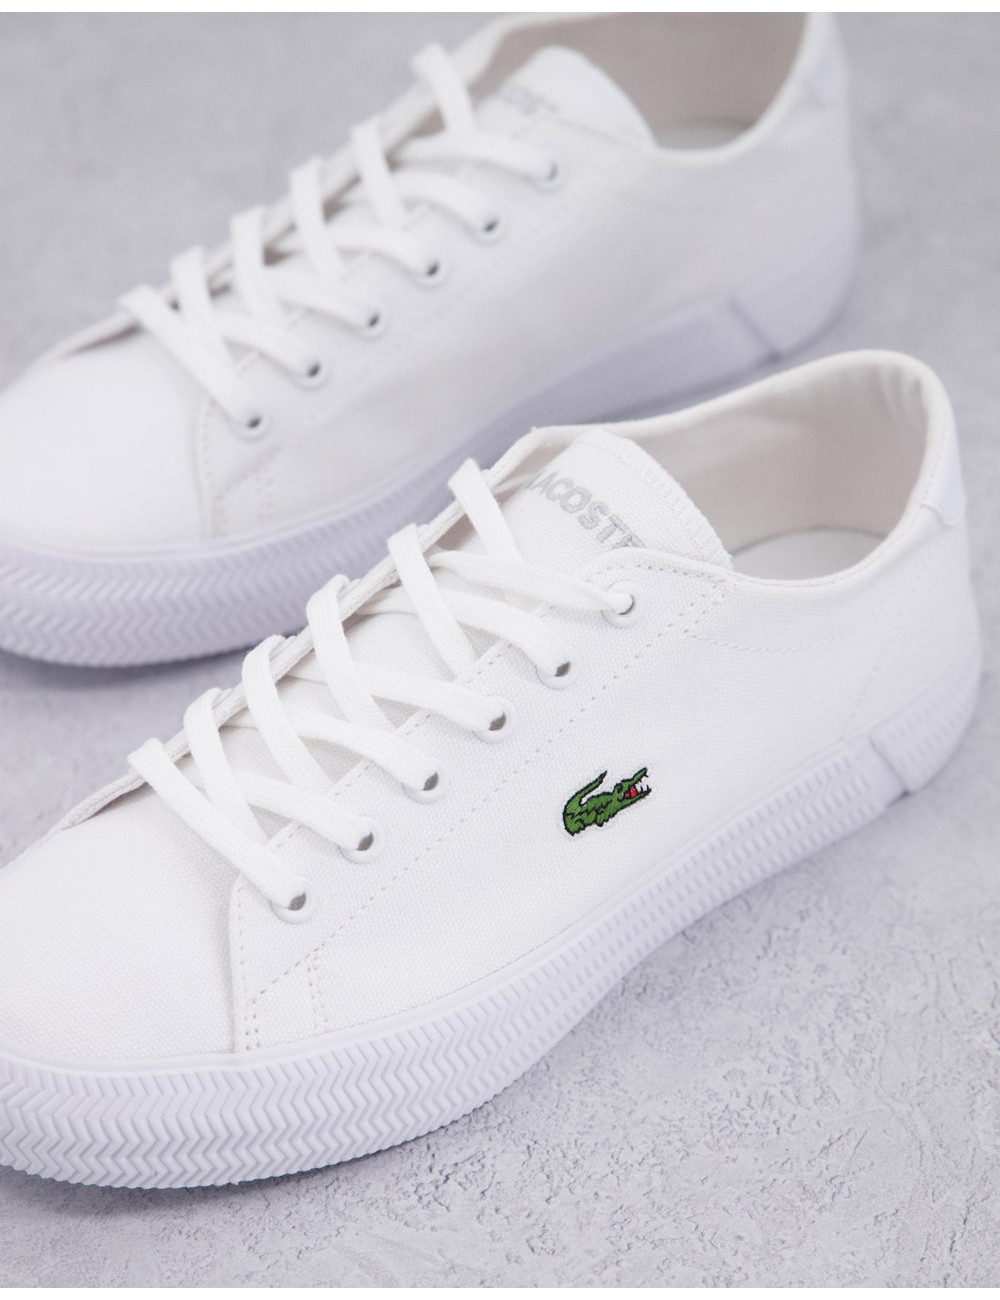 Lacoste Gripshot leather...